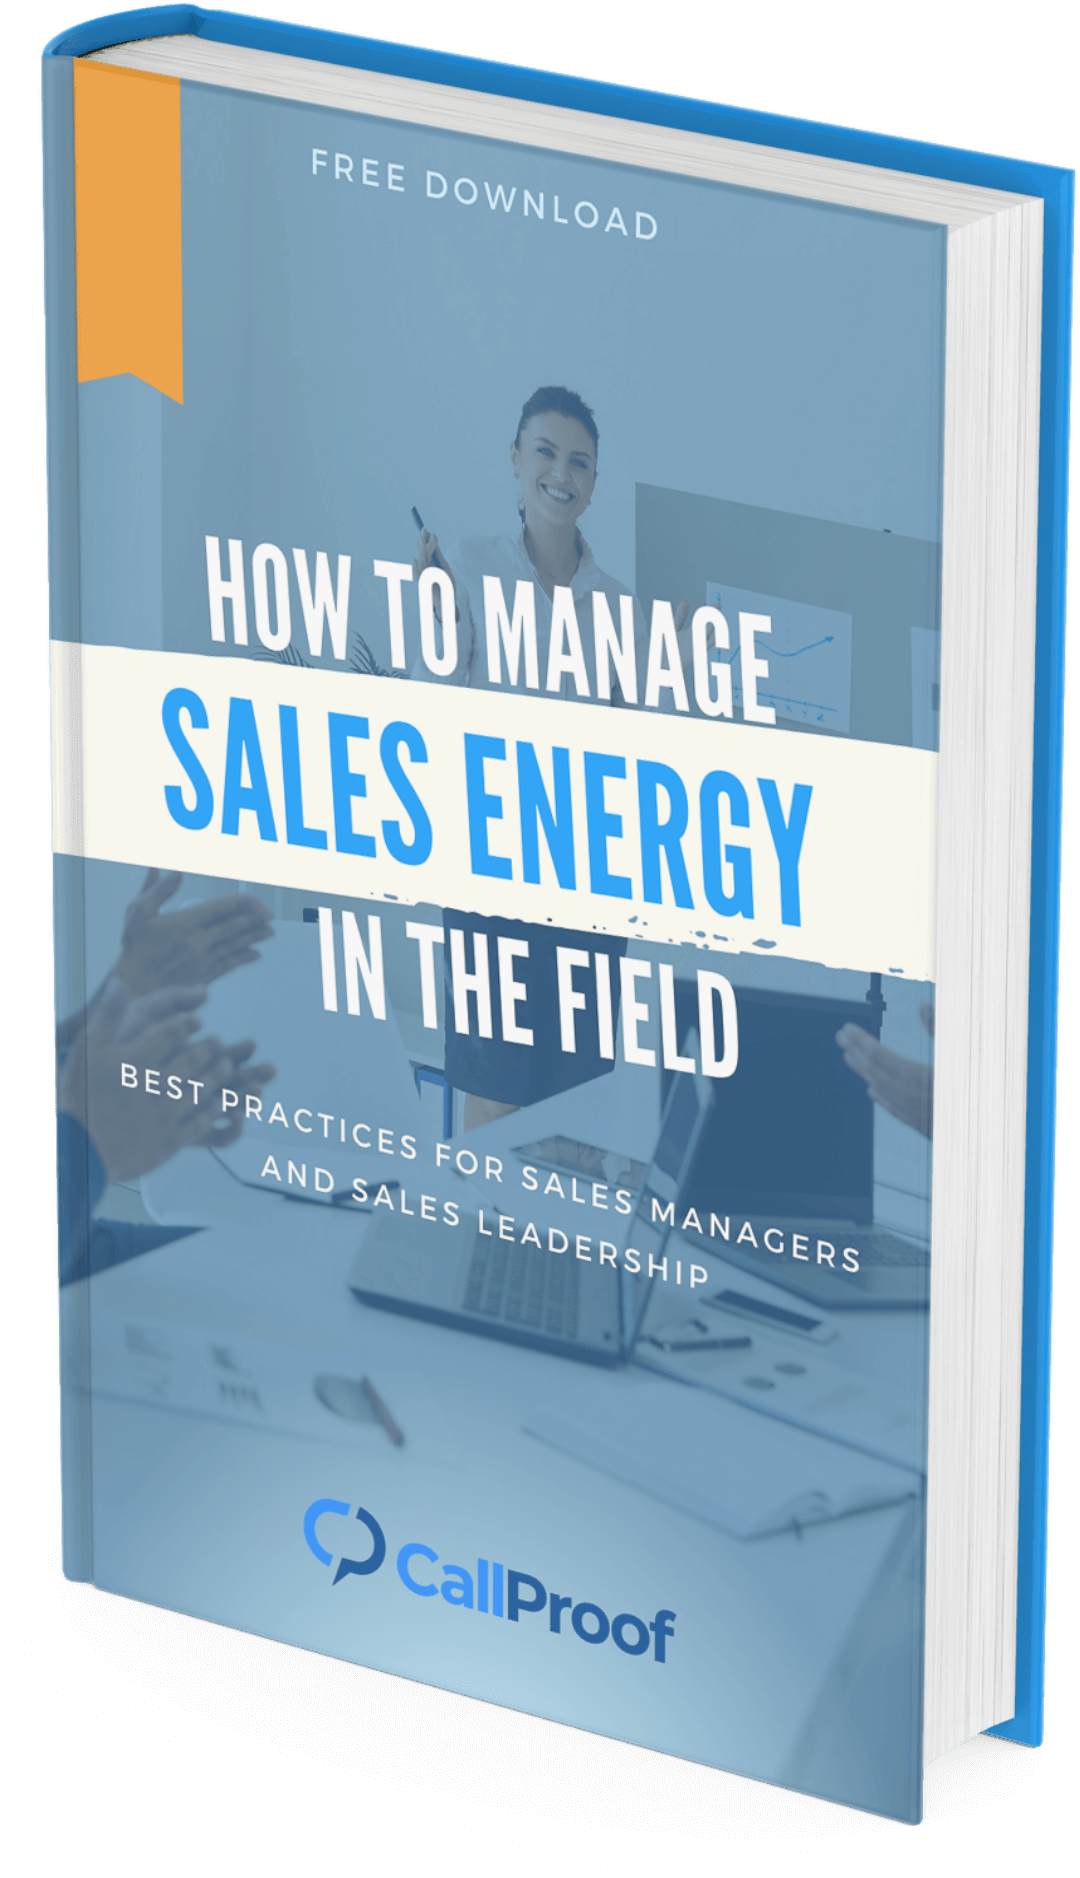 How-To-Manage-SalesEnergy_Mockup_RevisedBkgd_1-1